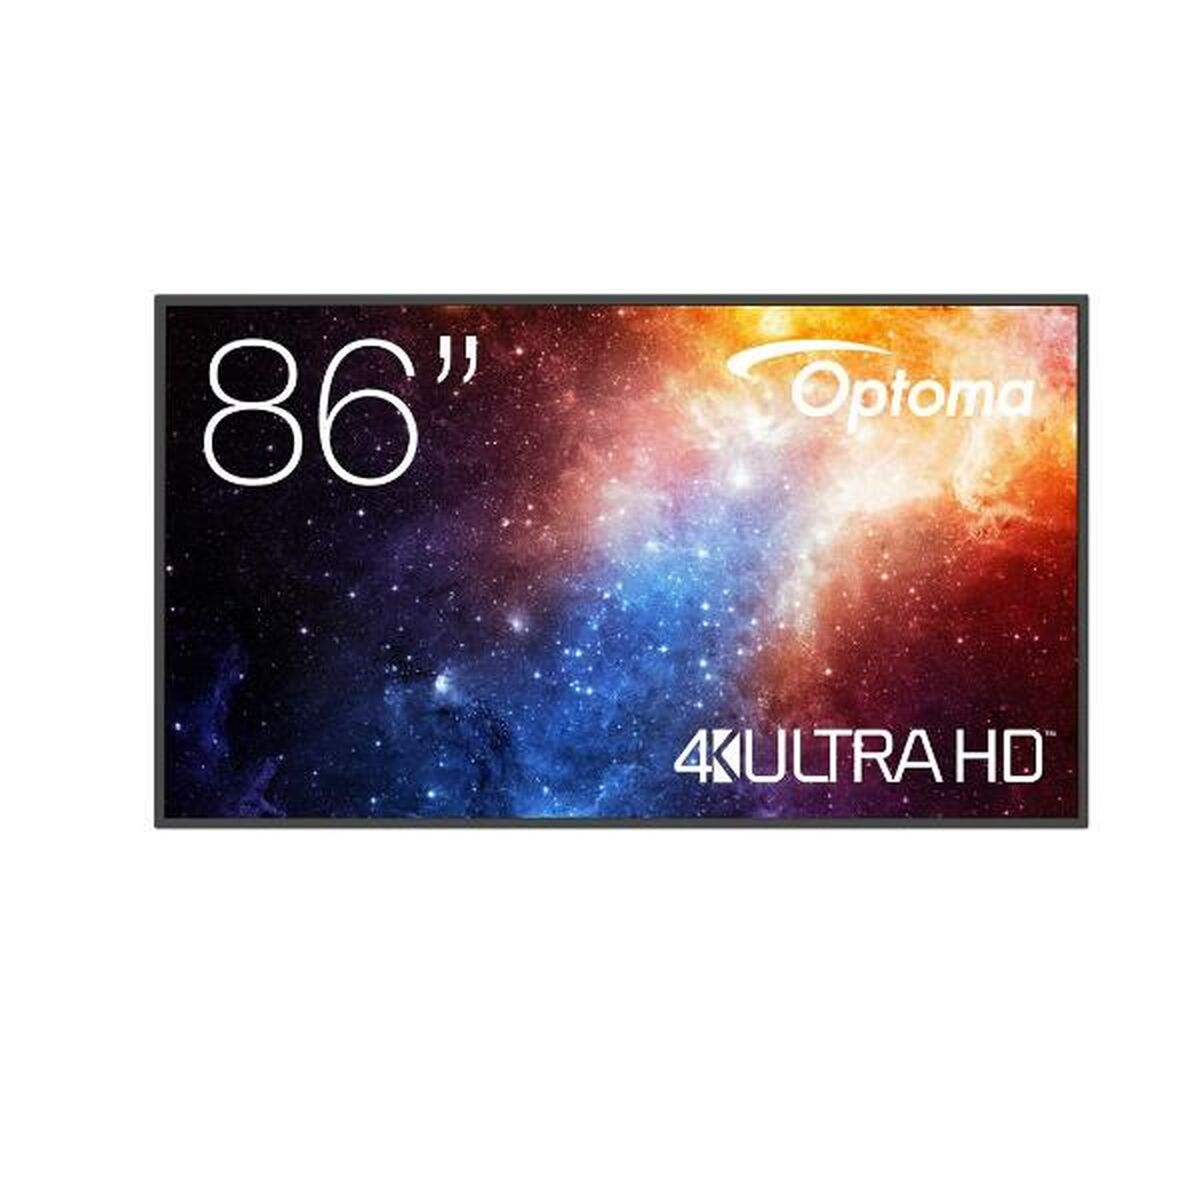 Monitor Videowall Optoma H1F2C0HBW101 4K Ultra HD 86", Optoma, Computing, monitor-videowall-optoma-h1f2c0hbw101-4k-ultra-hd-86, Brand_Optoma, category-reference-2609, category-reference-2642, category-reference-2644, category-reference-t-19685, category-reference-t-19902, computers / peripherals, Condition_NEW, office, Price_+ 1000, Teleworking, RiotNook